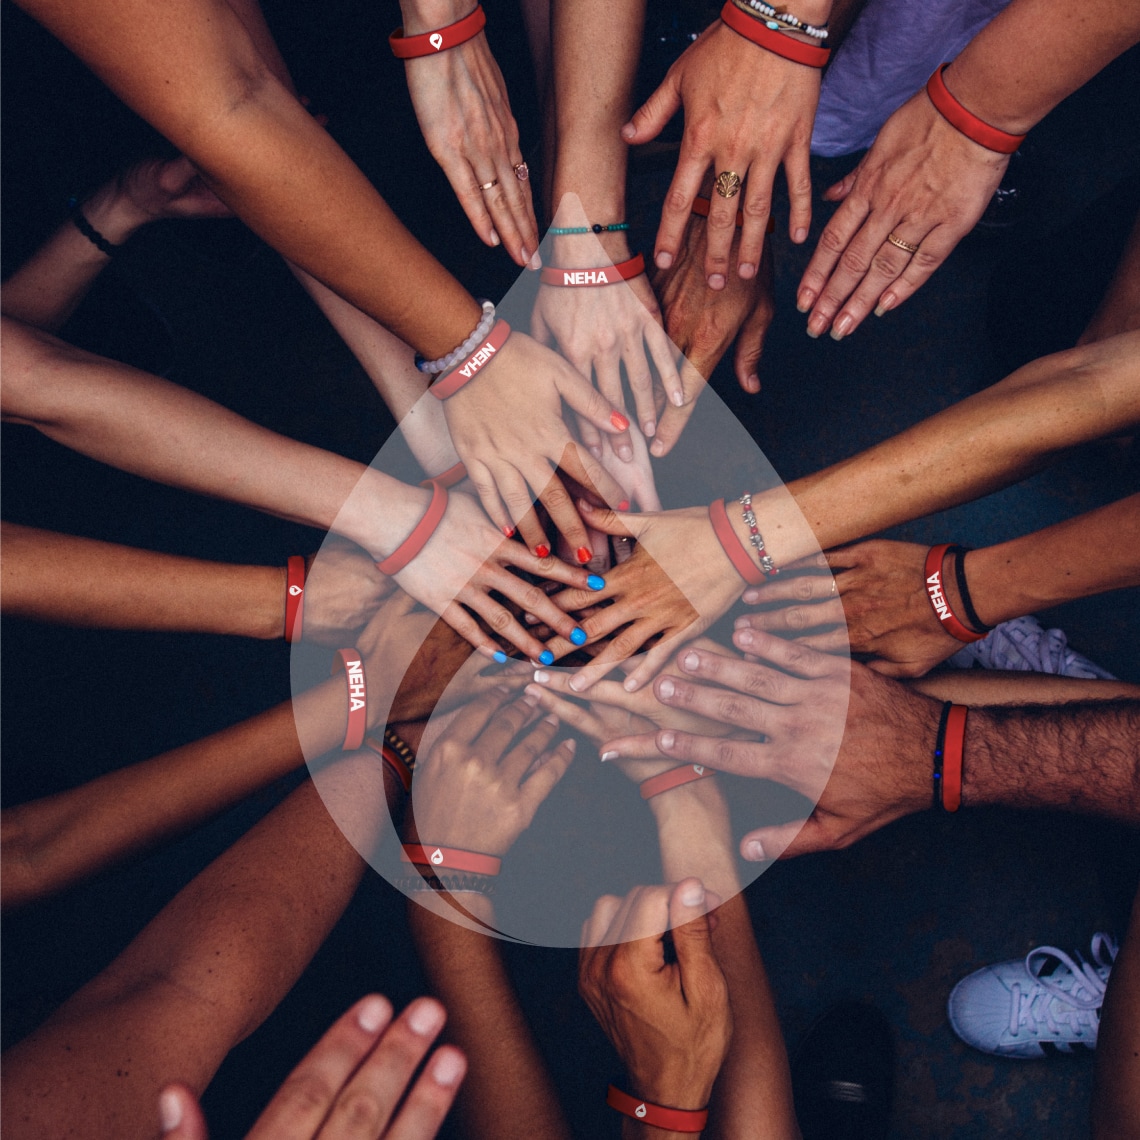 a group of people with their hands in a circle and the Neha symbol as a watermark